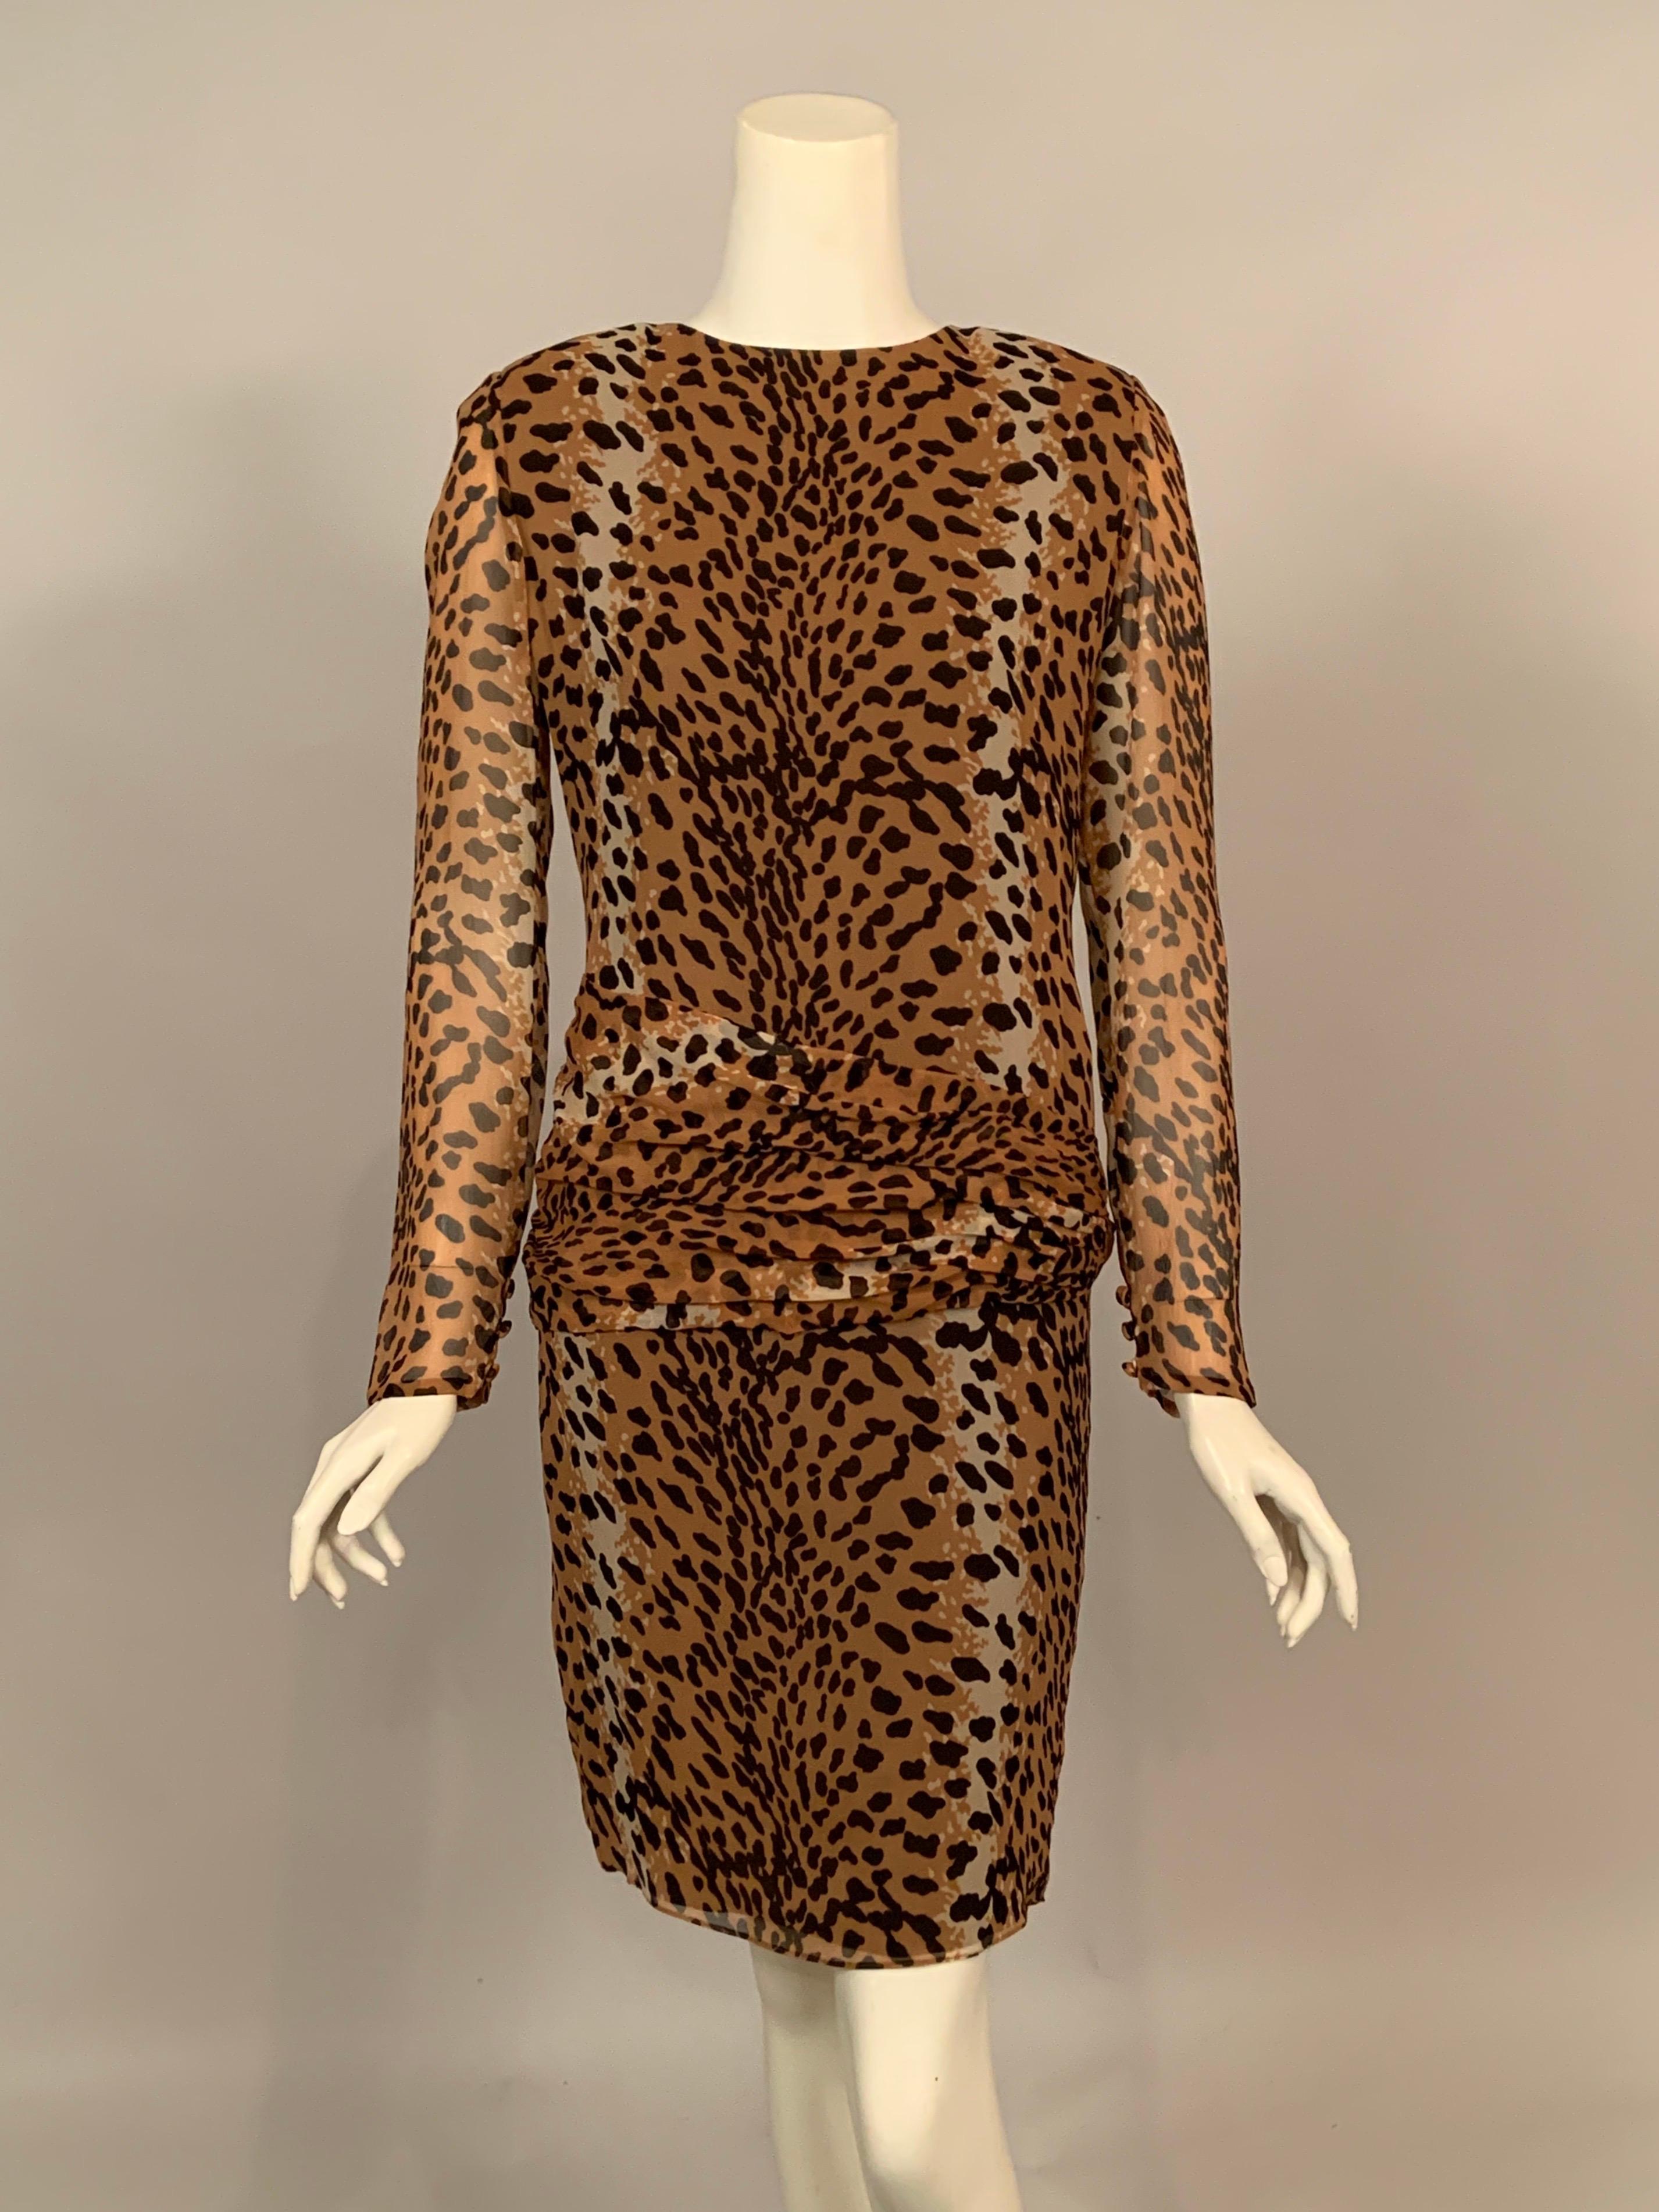 A beautiful spotted cat or leopard print sheer silk chiffon is lined with mocha colored silk for added depth. This eye catching dress has a round neckline, long sleeves with three covered buttons and loops at the wrists, an invisible center back